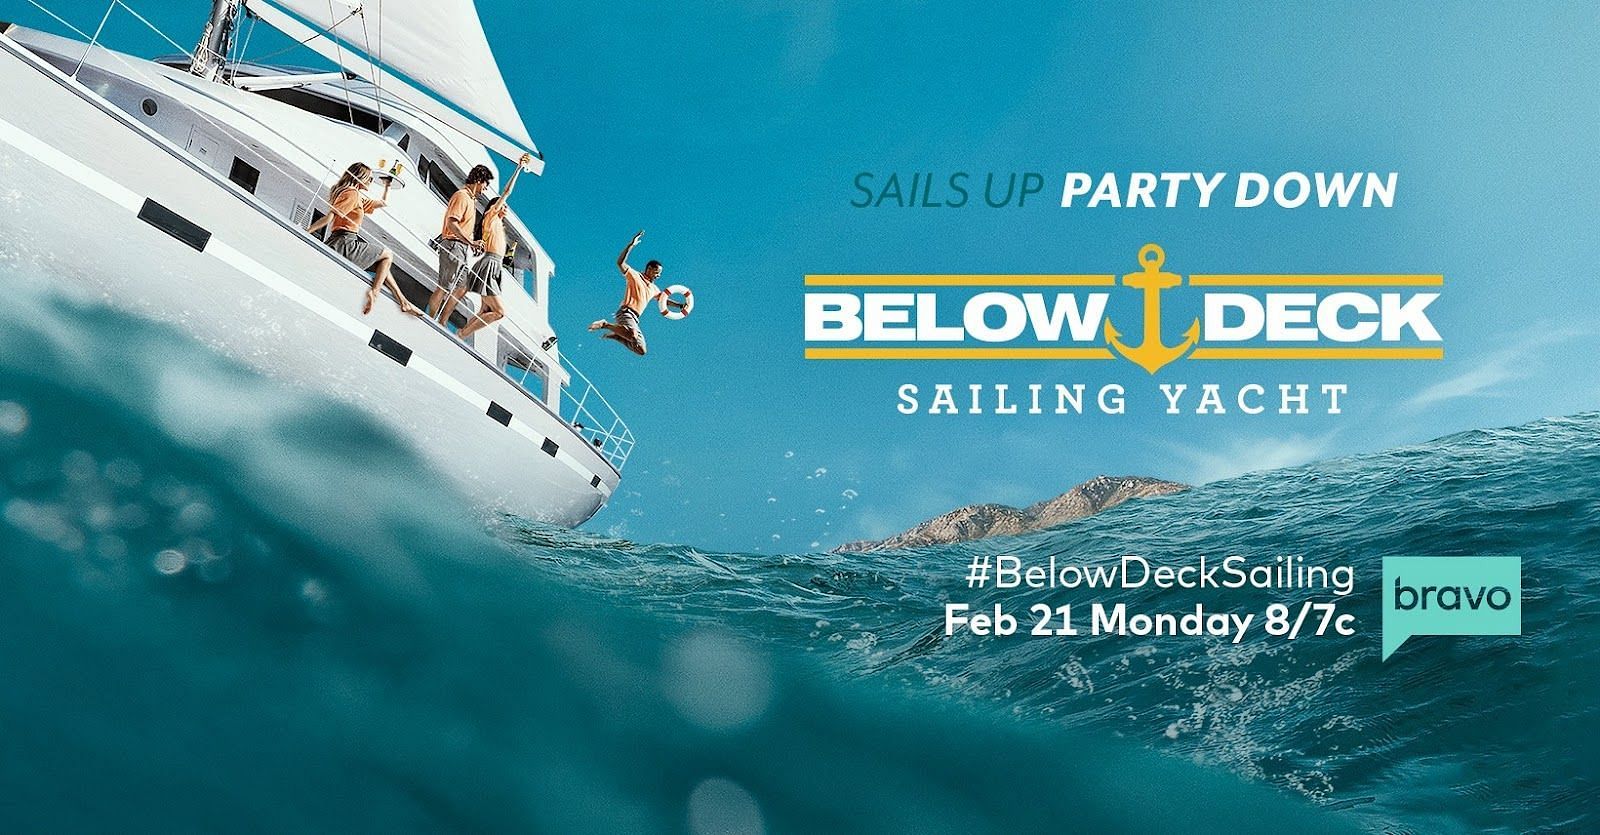 How much is a 3 day charter on Below Deck?